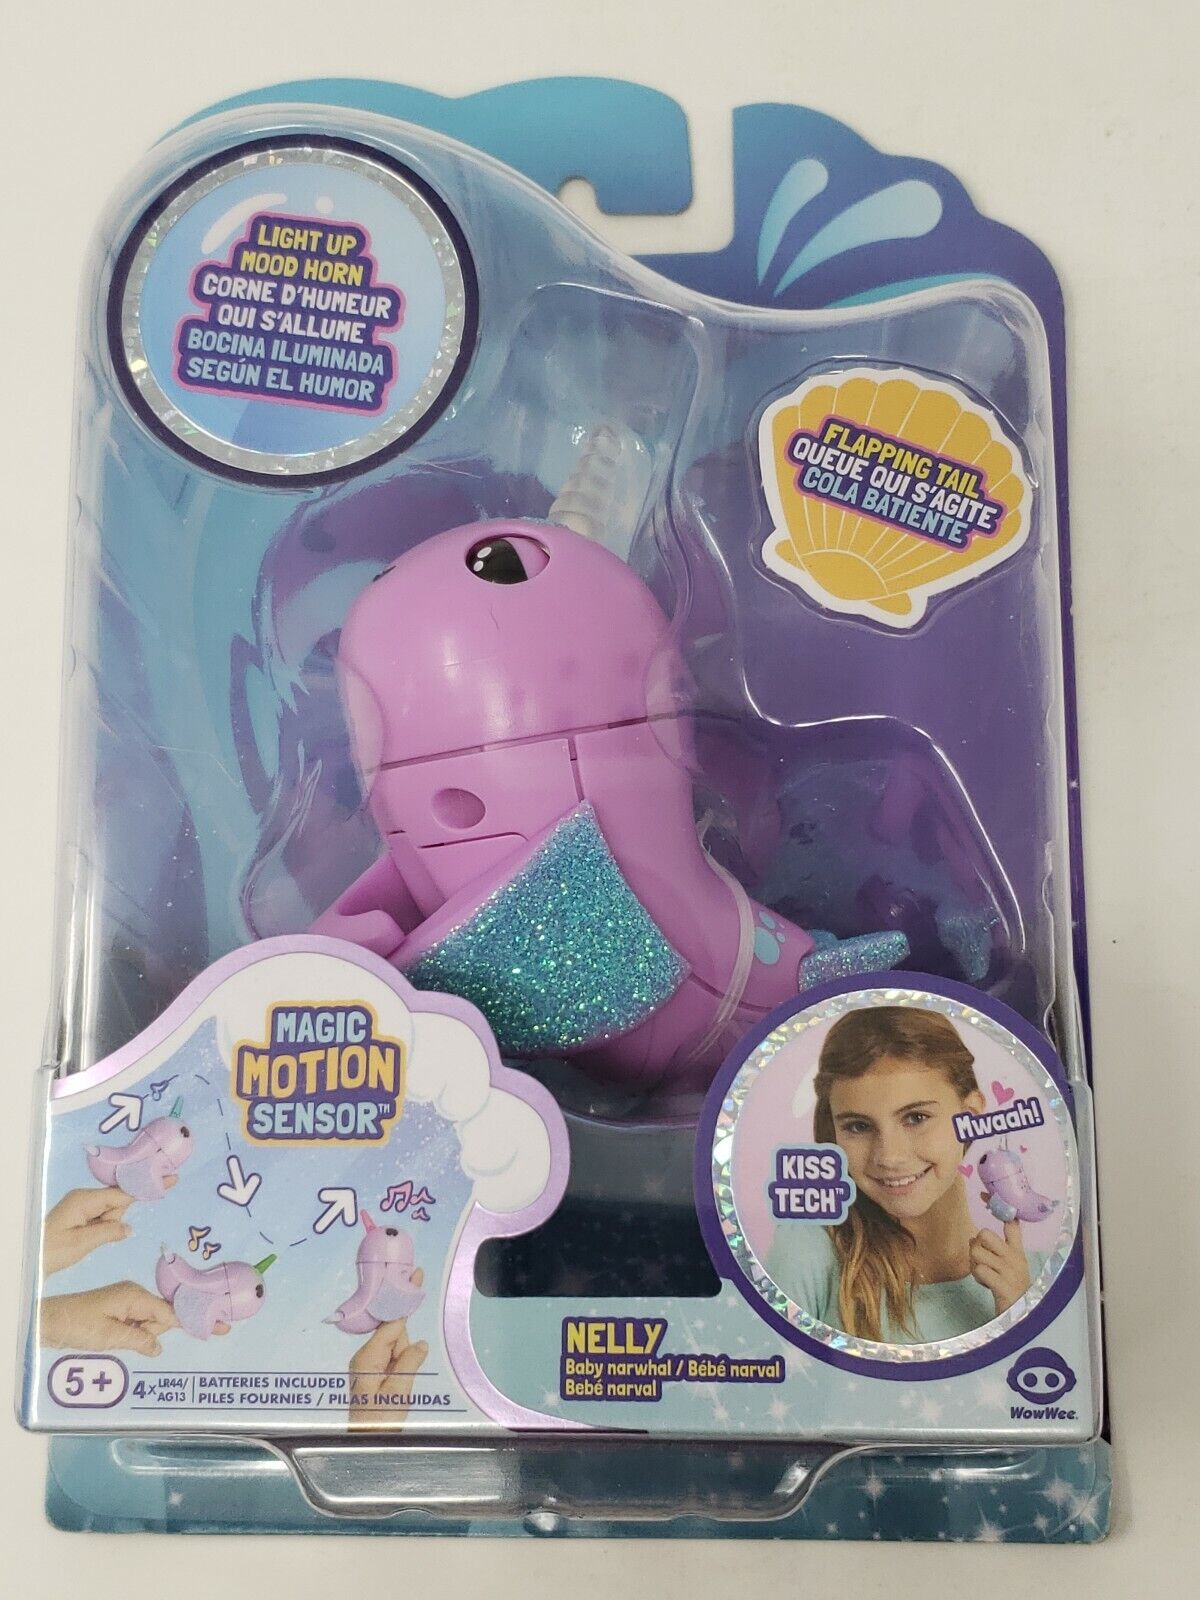 Fingerlings NELLY Baby Narwhal Light up Mood Horn Flapping Tail Kiss Tech NEW